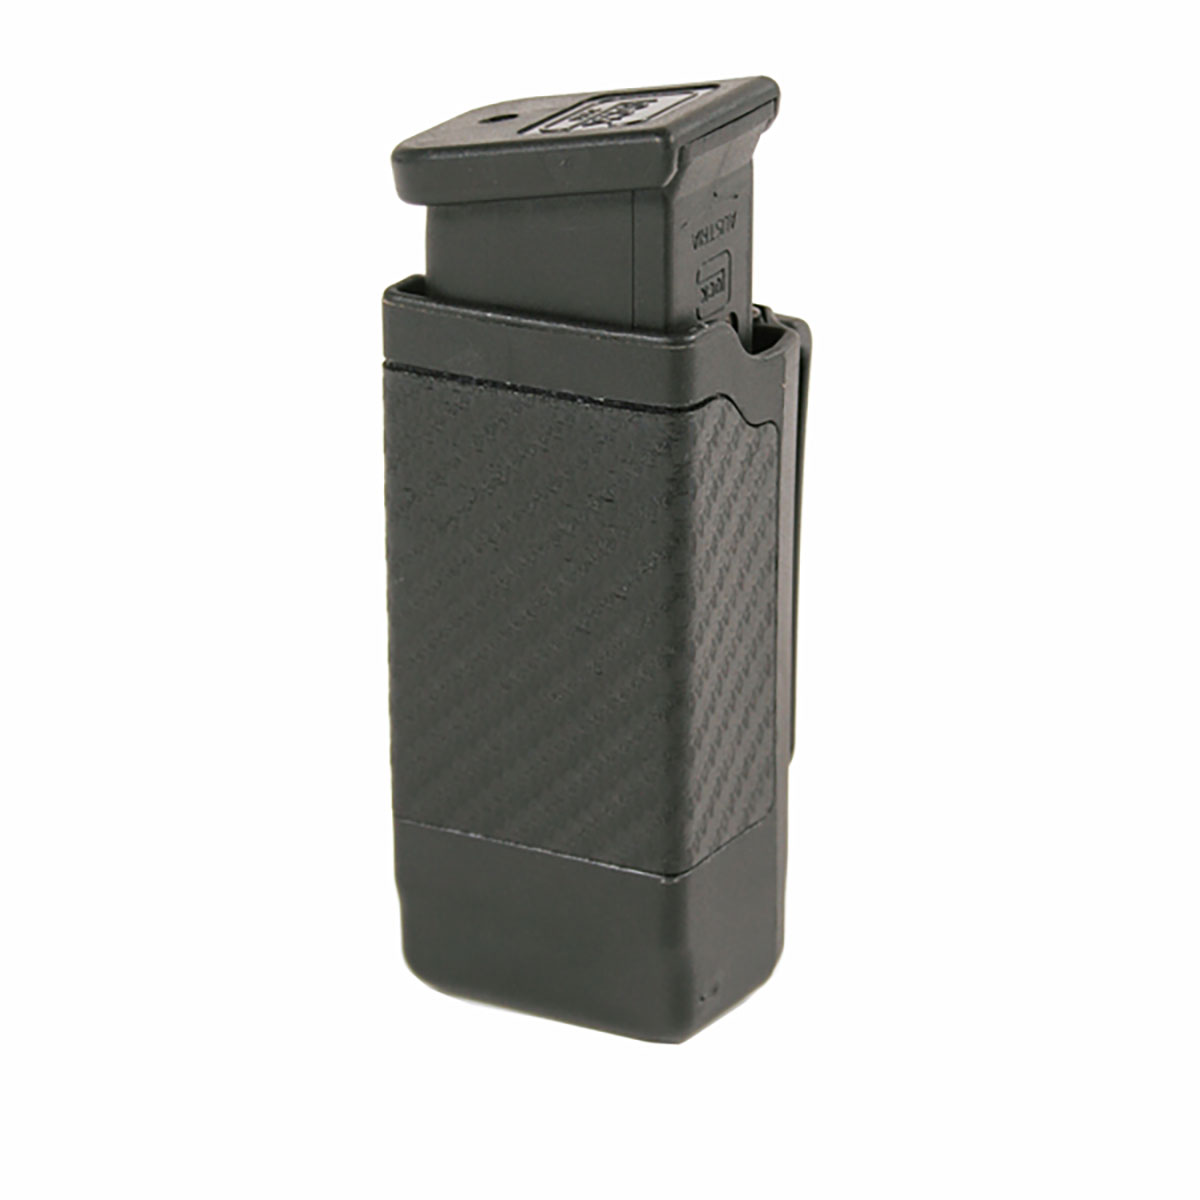 BLACKHAWK - SINGLE MAG CASE FOR DOUBLE STACK MAGS